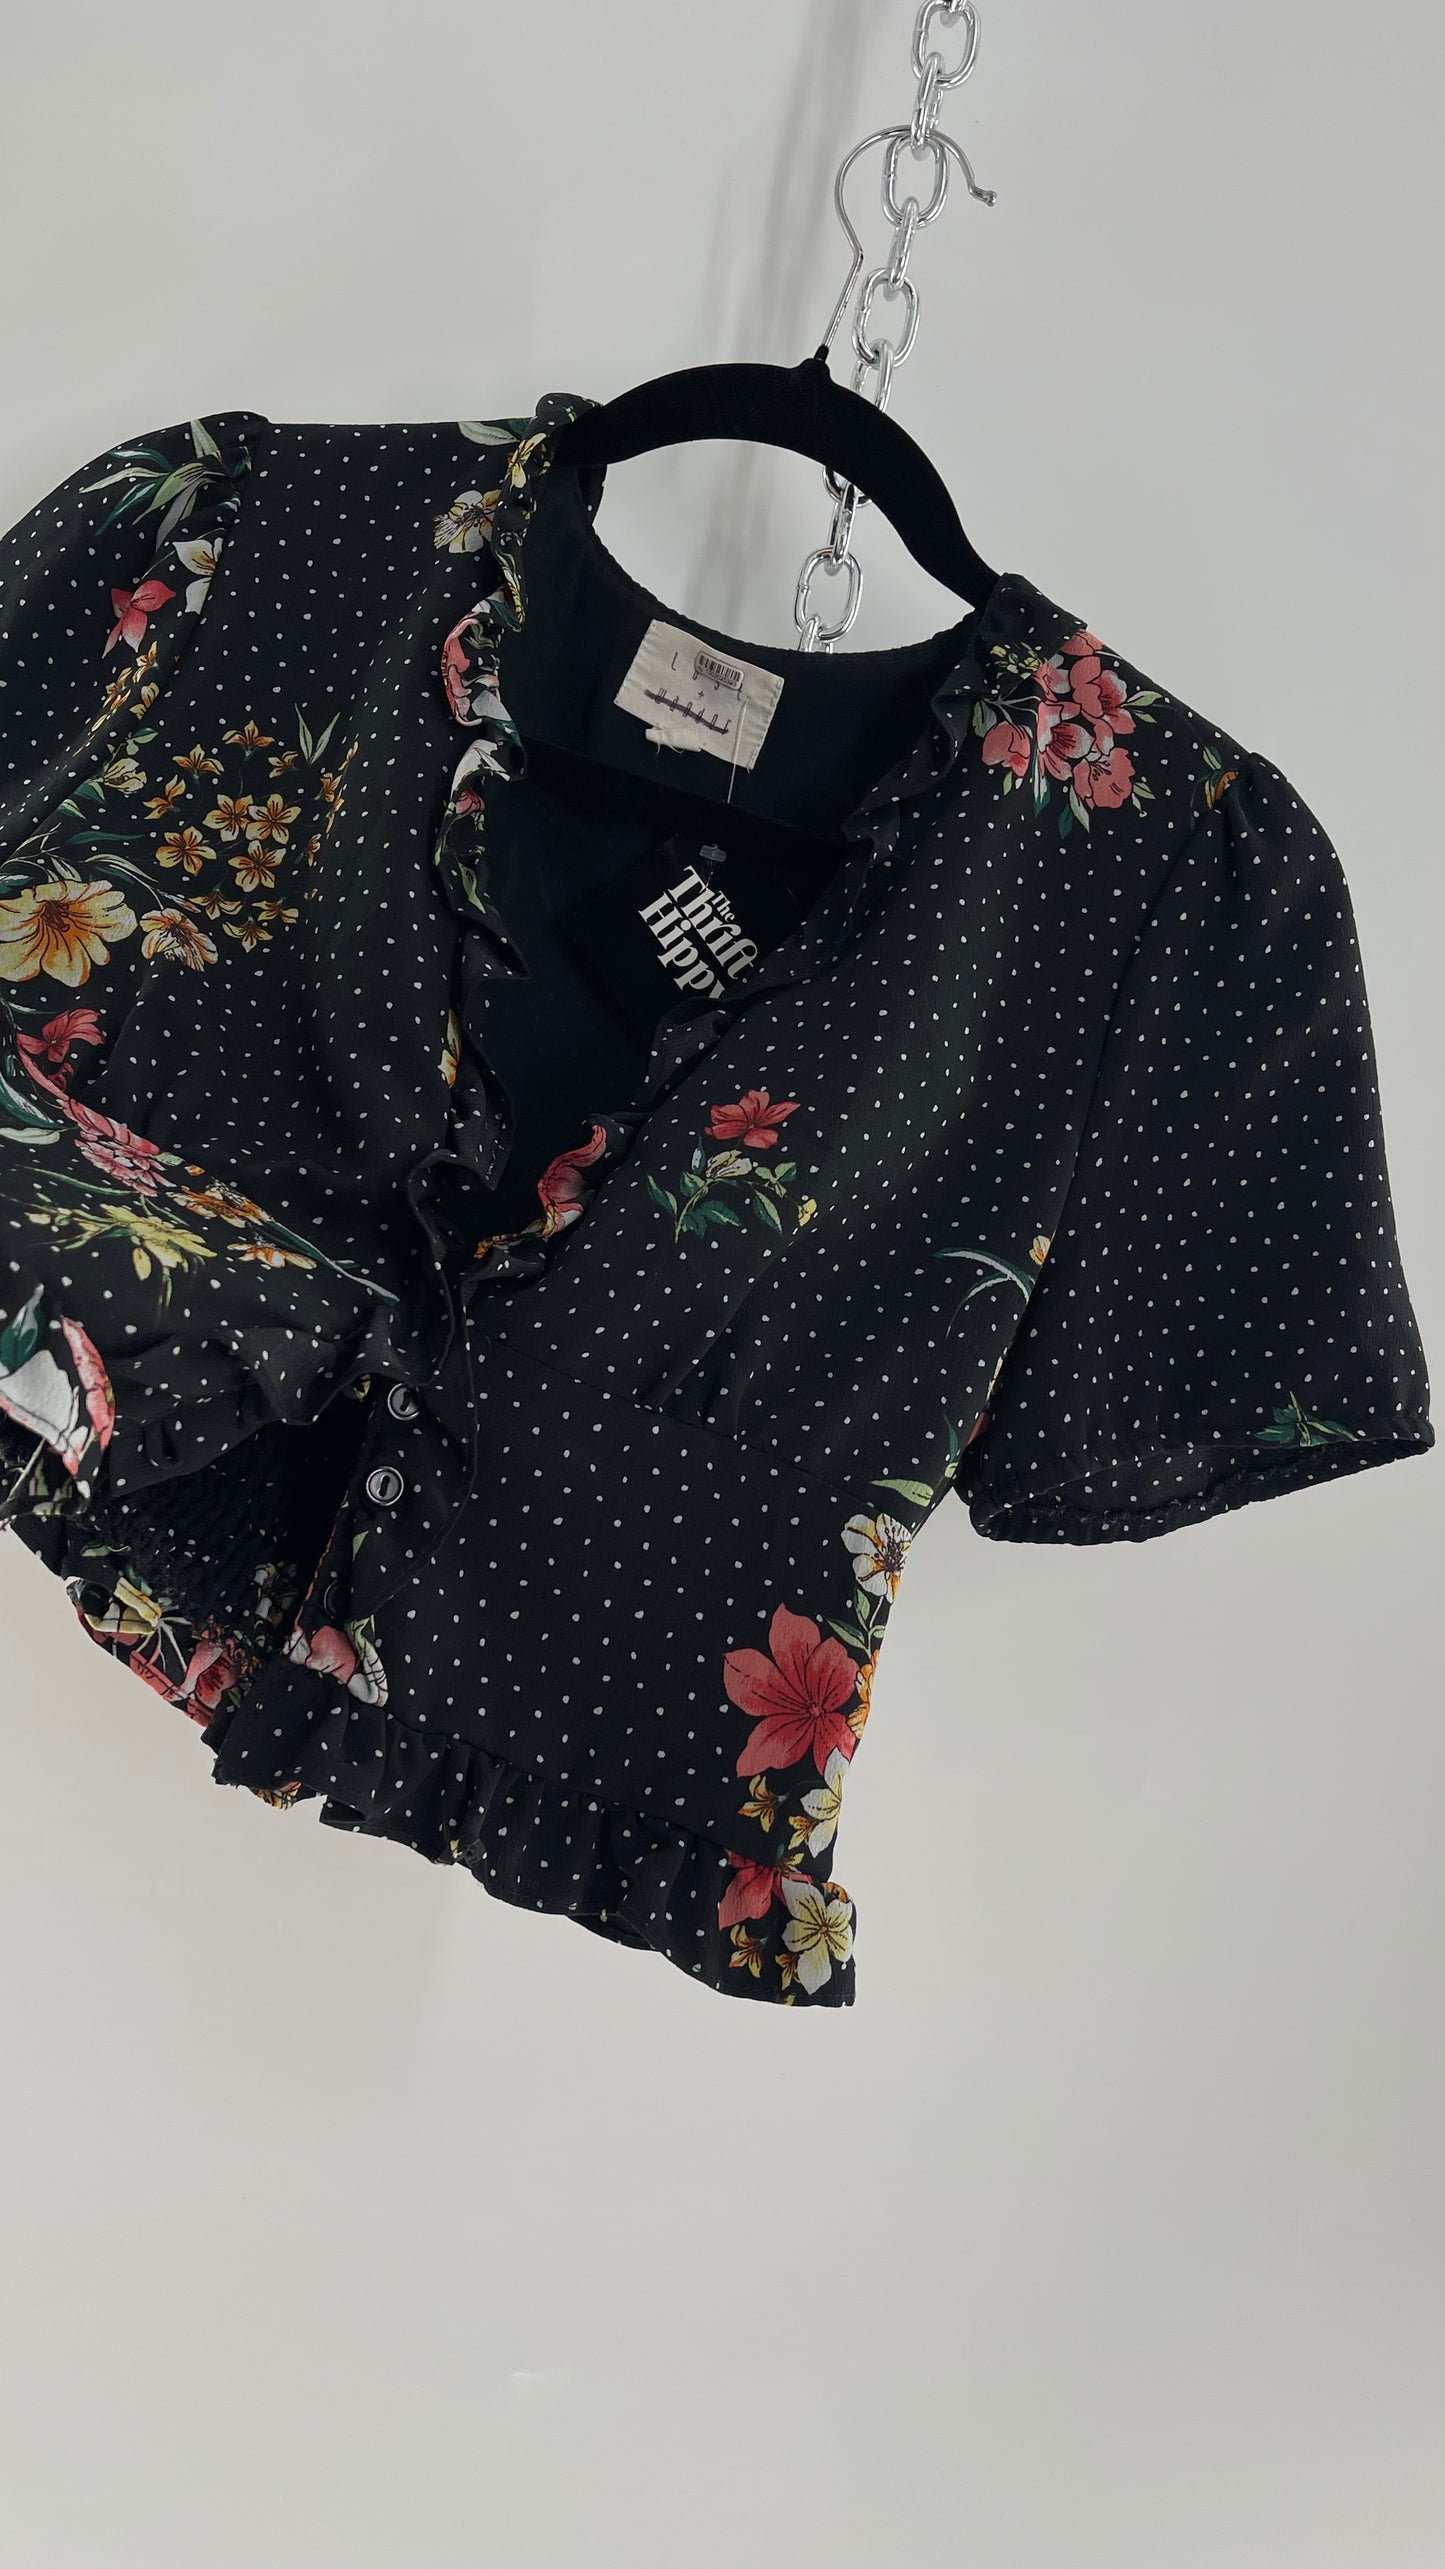 Lost &Wander Polka Dot Florals, Puff Sleeved Button Front (XS)